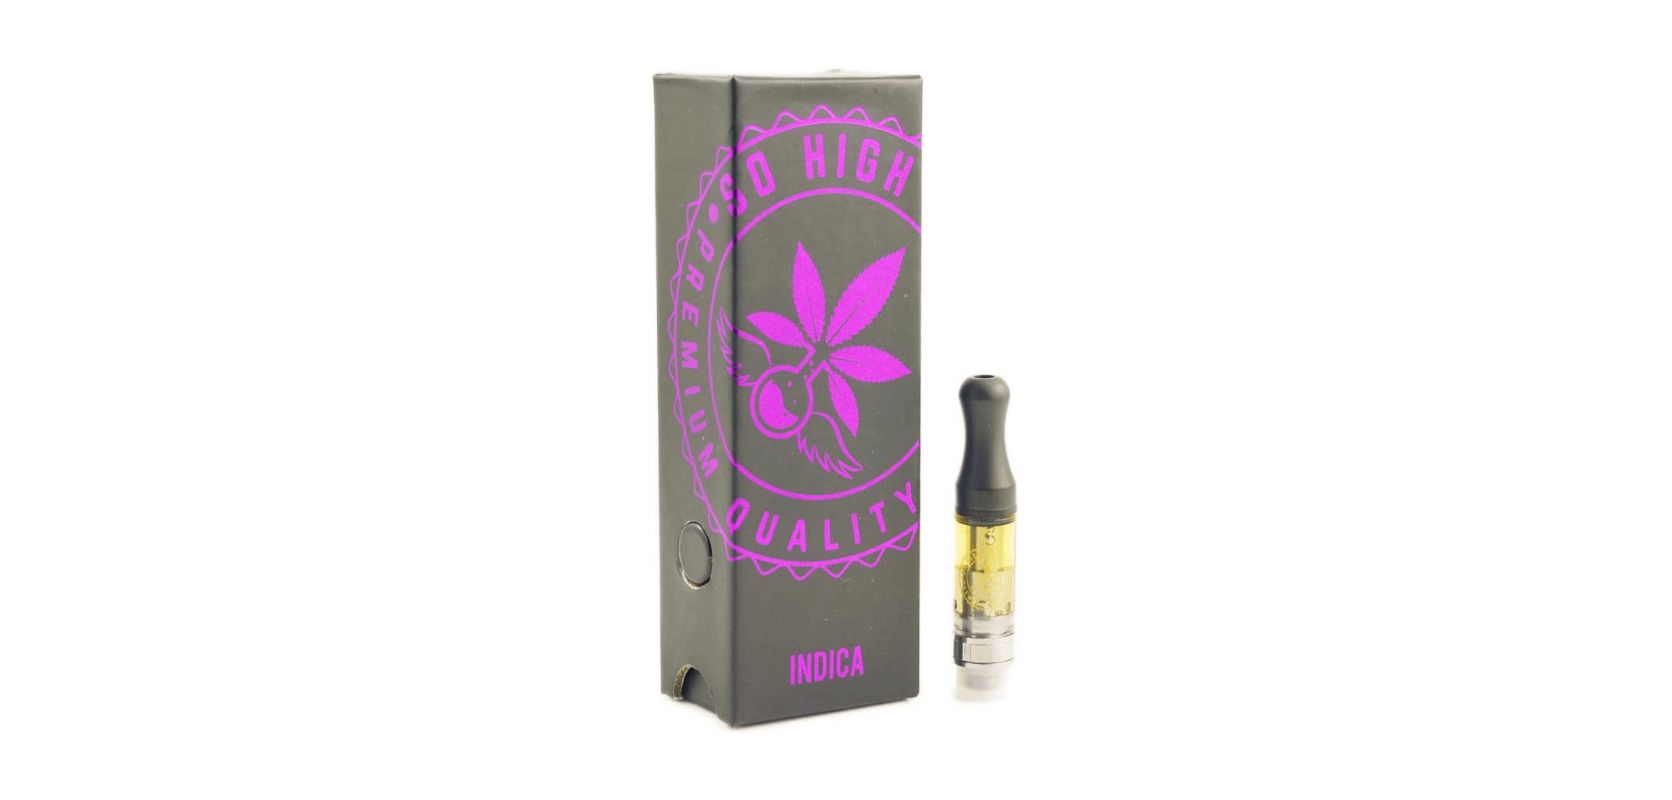 The So High Extracts Premium Vape 0.5ML THC - Blood Orange (Indica) is a delectable vape cart featuring a powerful sedative hybrid famous for its relaxing effects. 